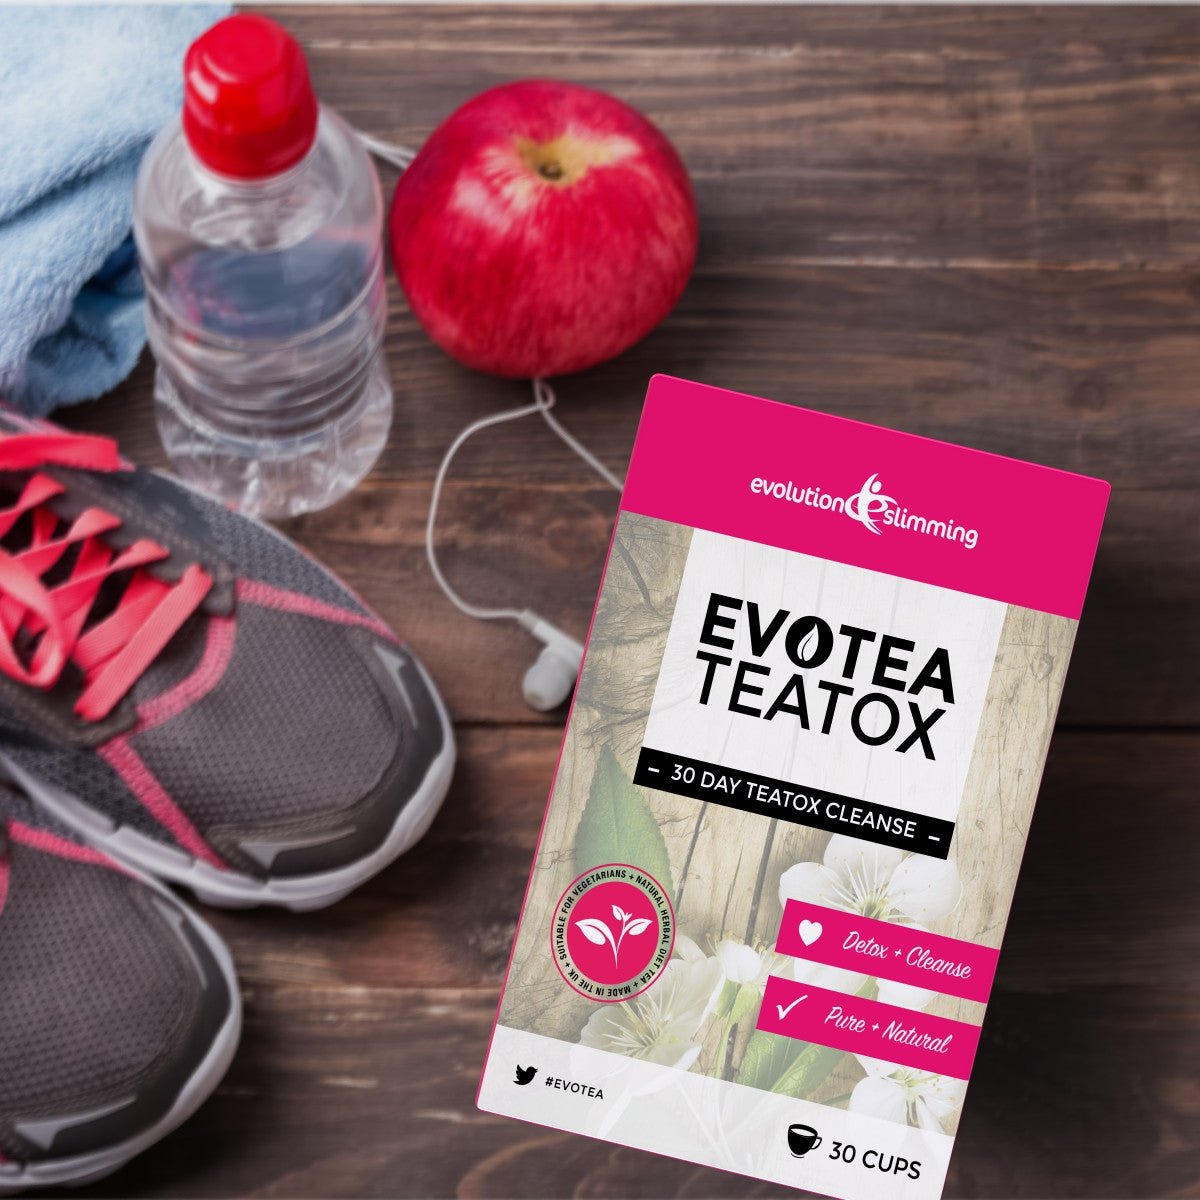 EvoTea Teatox featured in Womans Own Magazine